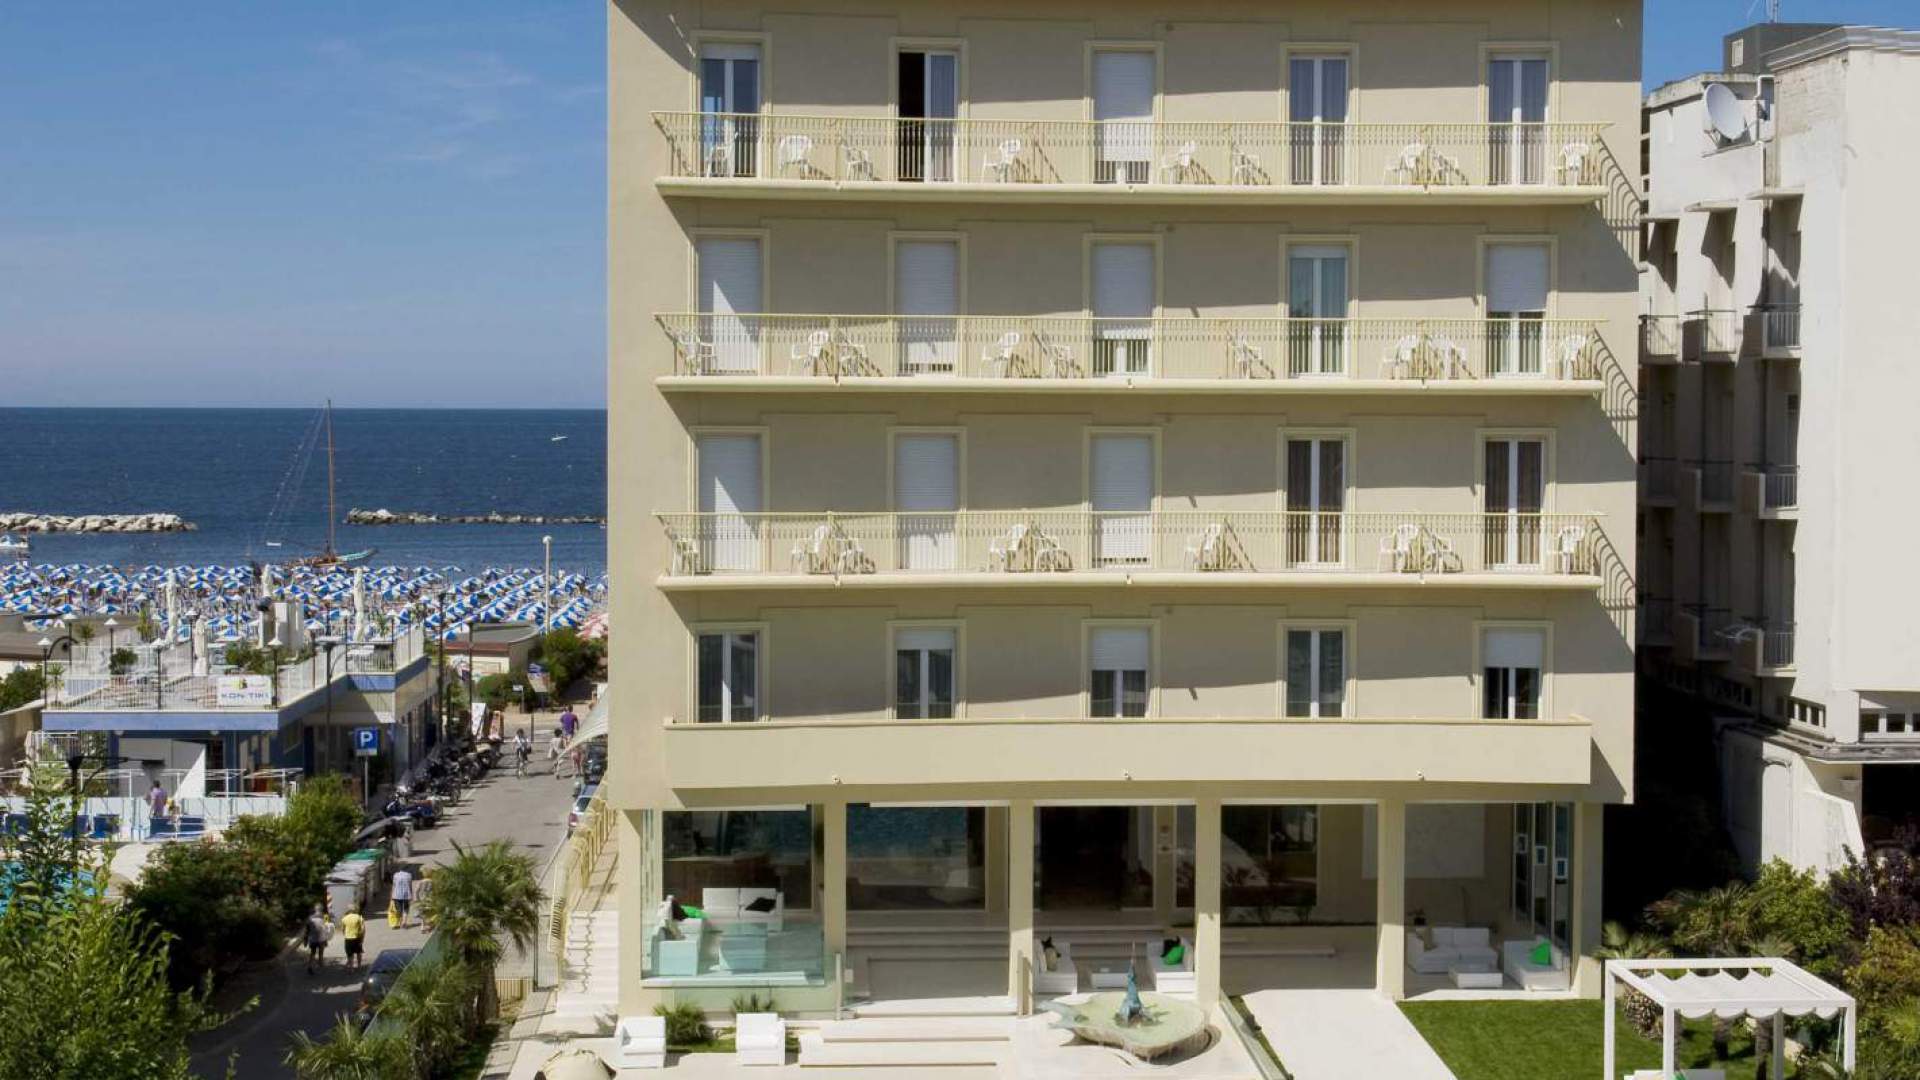 Cattolica - Hotel Beaurivage